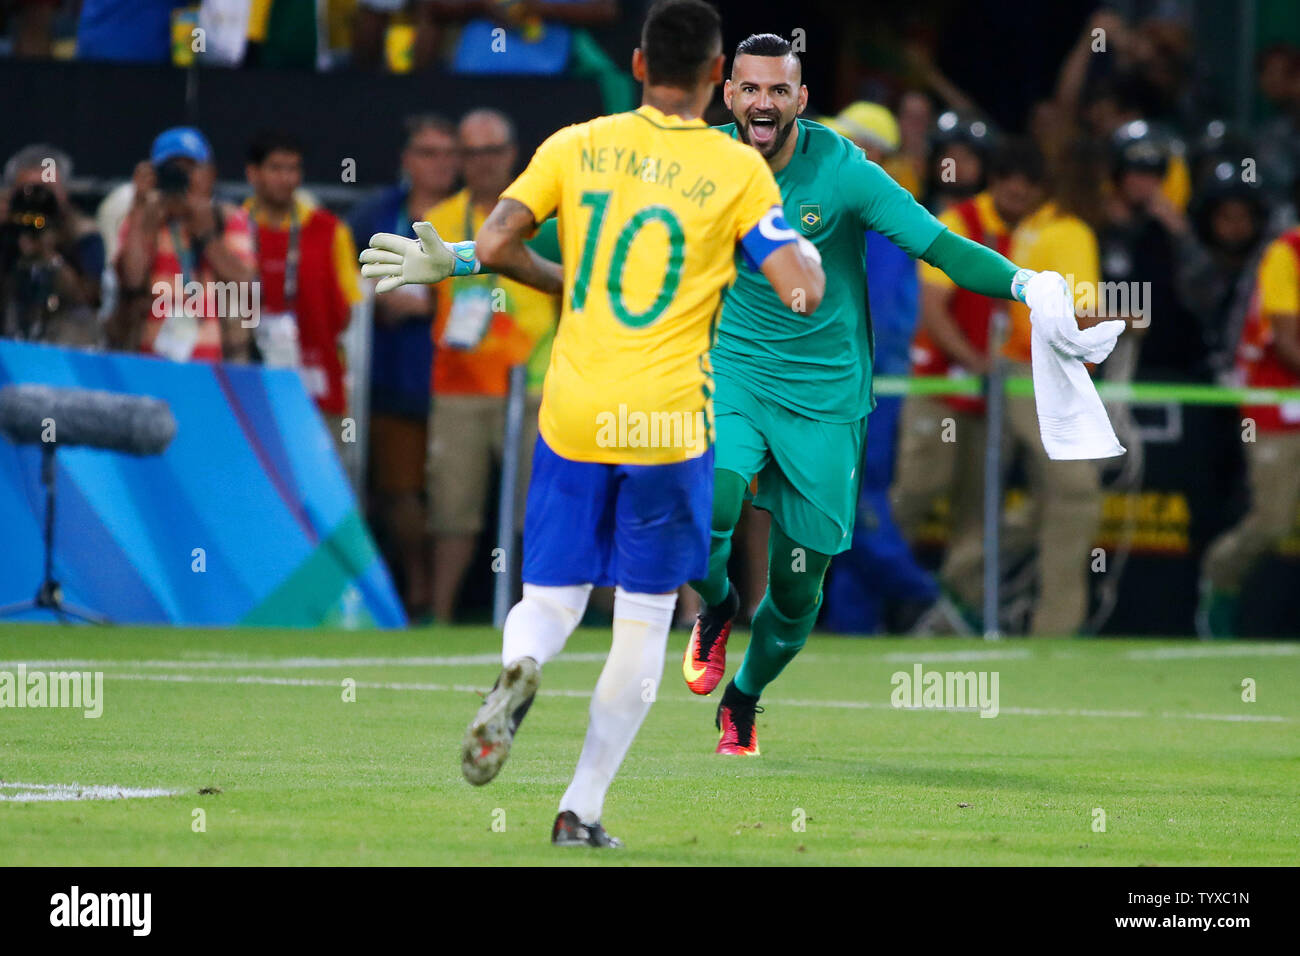 Brazil forward Neymar (10) charges towards goaltender Waverton (1) after Neymar scored the game winning goal in an overtime shoot-out against Germany in the Men's Gold Medal soccer match at the 2016 Rio Summer Olympics in Rio de Janeiro, Brazil, on August 20, 2016. Brazil defeated Germany in 5-4 in overtime penalty kicks.   Photo by Matthew Healey/UPI Stock Photo